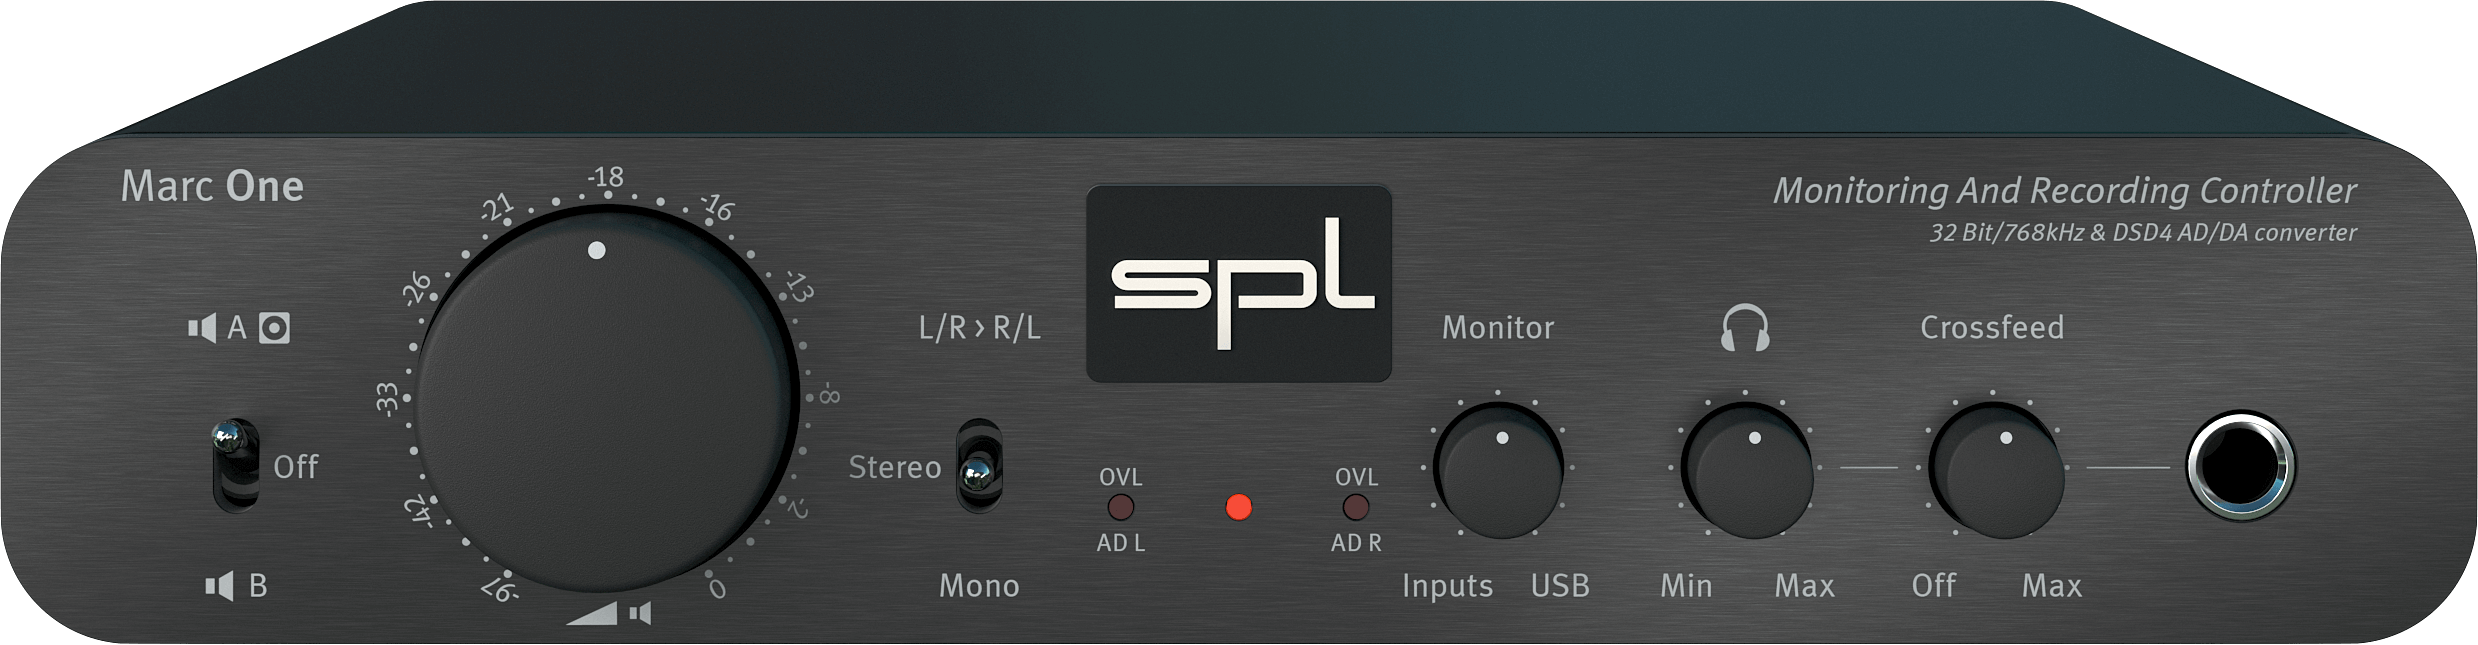 REVIEW: SPL Marc One Monitor and Recording Controller